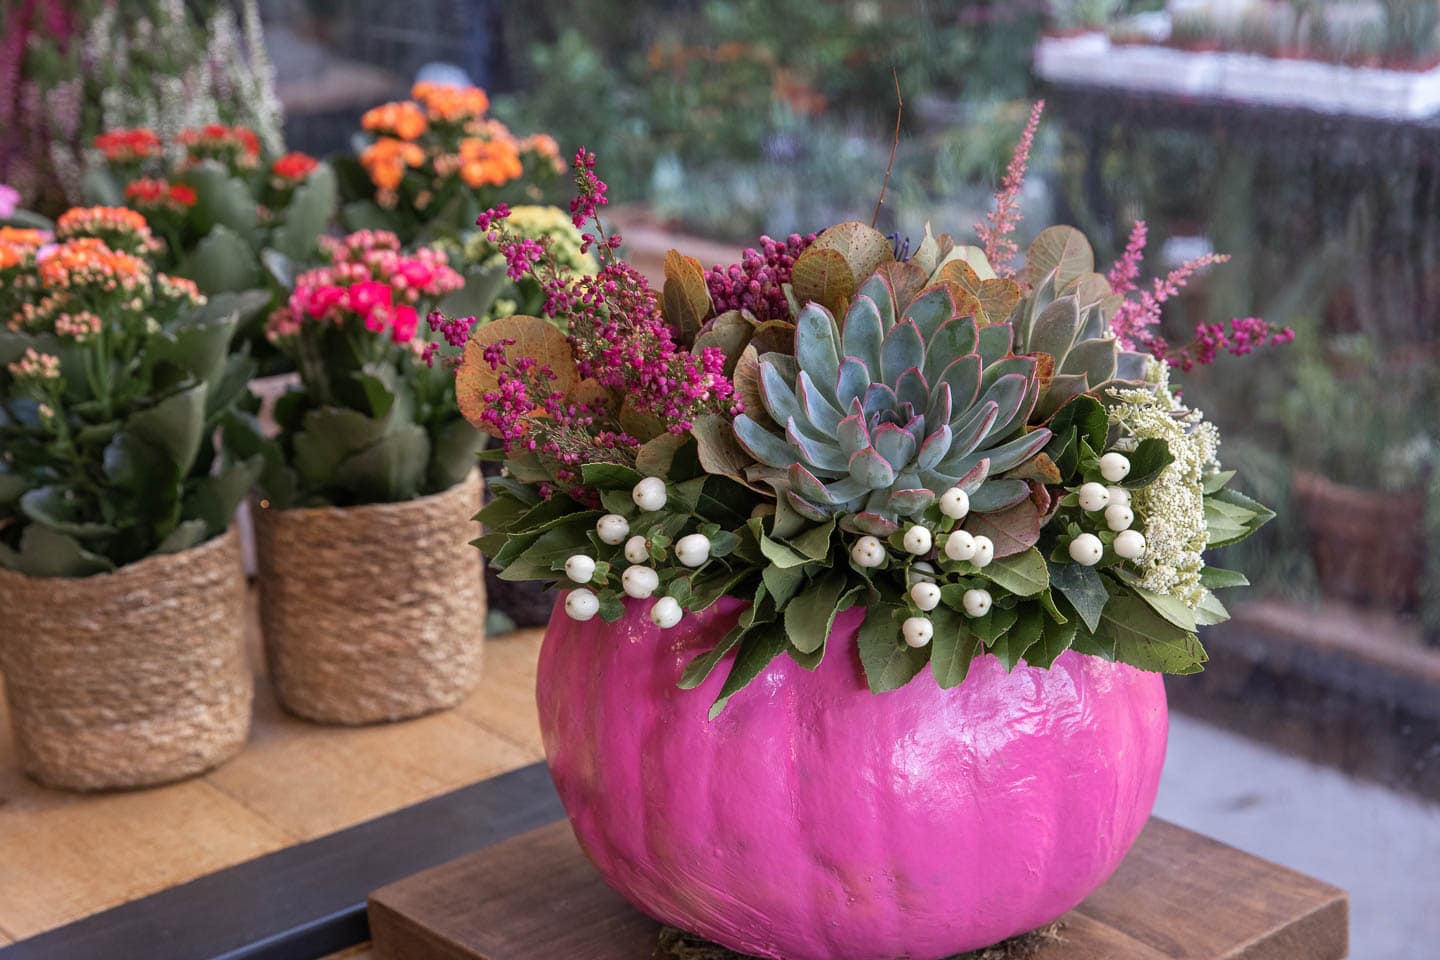 Faux pink pumpkin with succulents planted in it